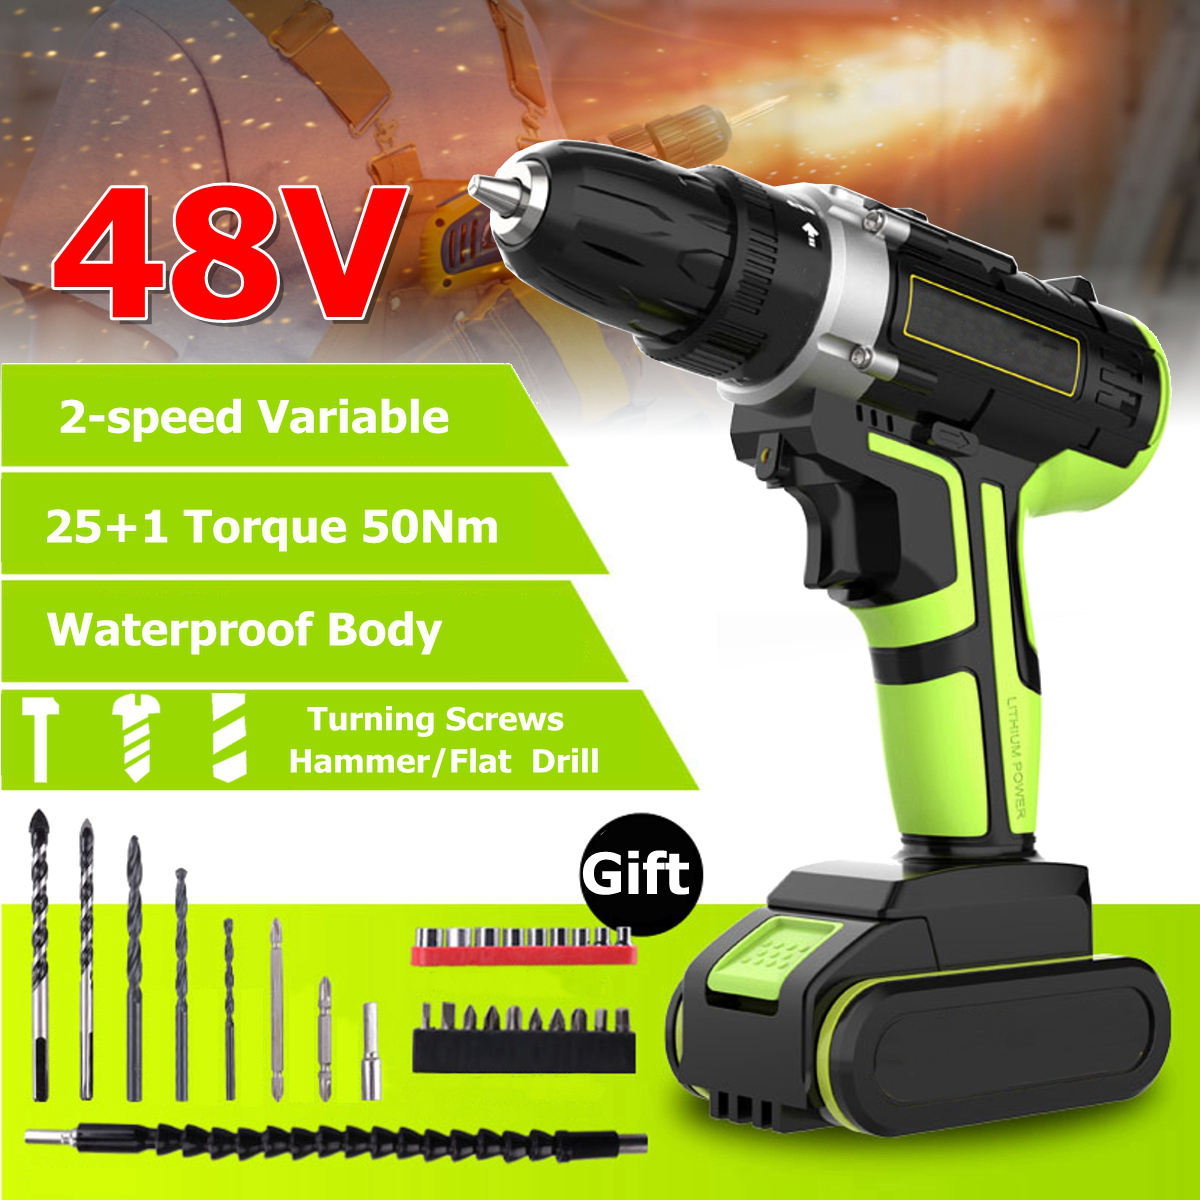 3 In 1 Hammer Drill 48V Cordless Drill Double Speed Power Drills LED lighting 1/2Pcs Large Capacity Battery 50Nm 25+1 Torque Electric Drill 14